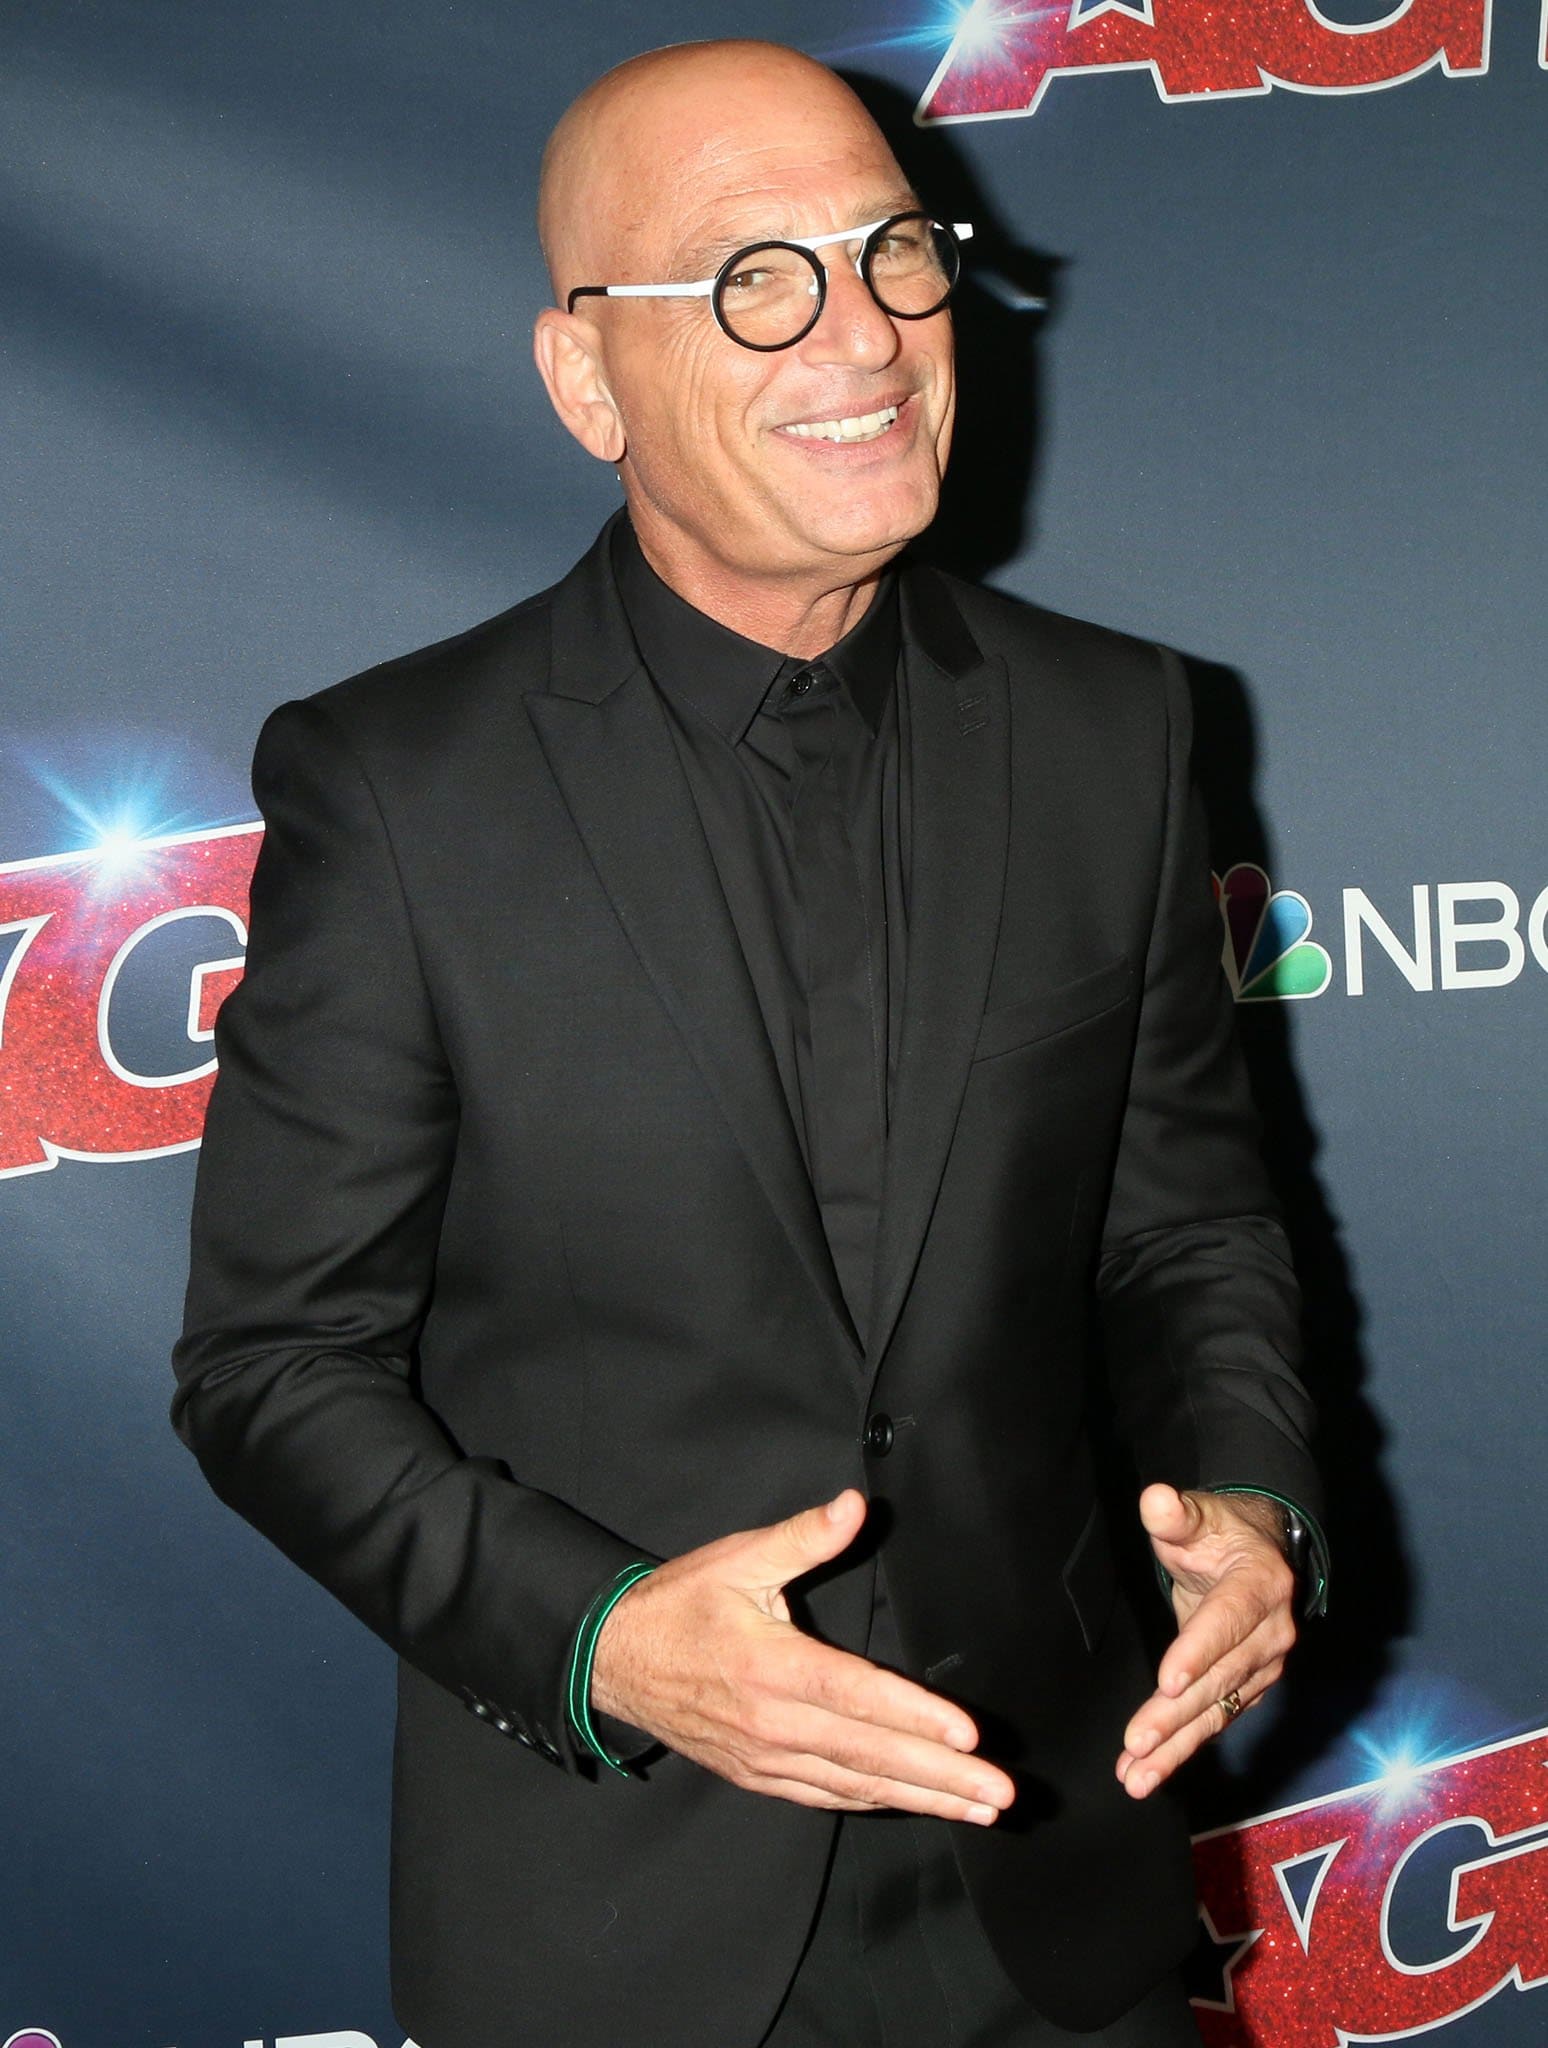 Howie Mandel is best known for hosting Deal or No Deal and for being a judge on NBC's America's Got Talent since 2010